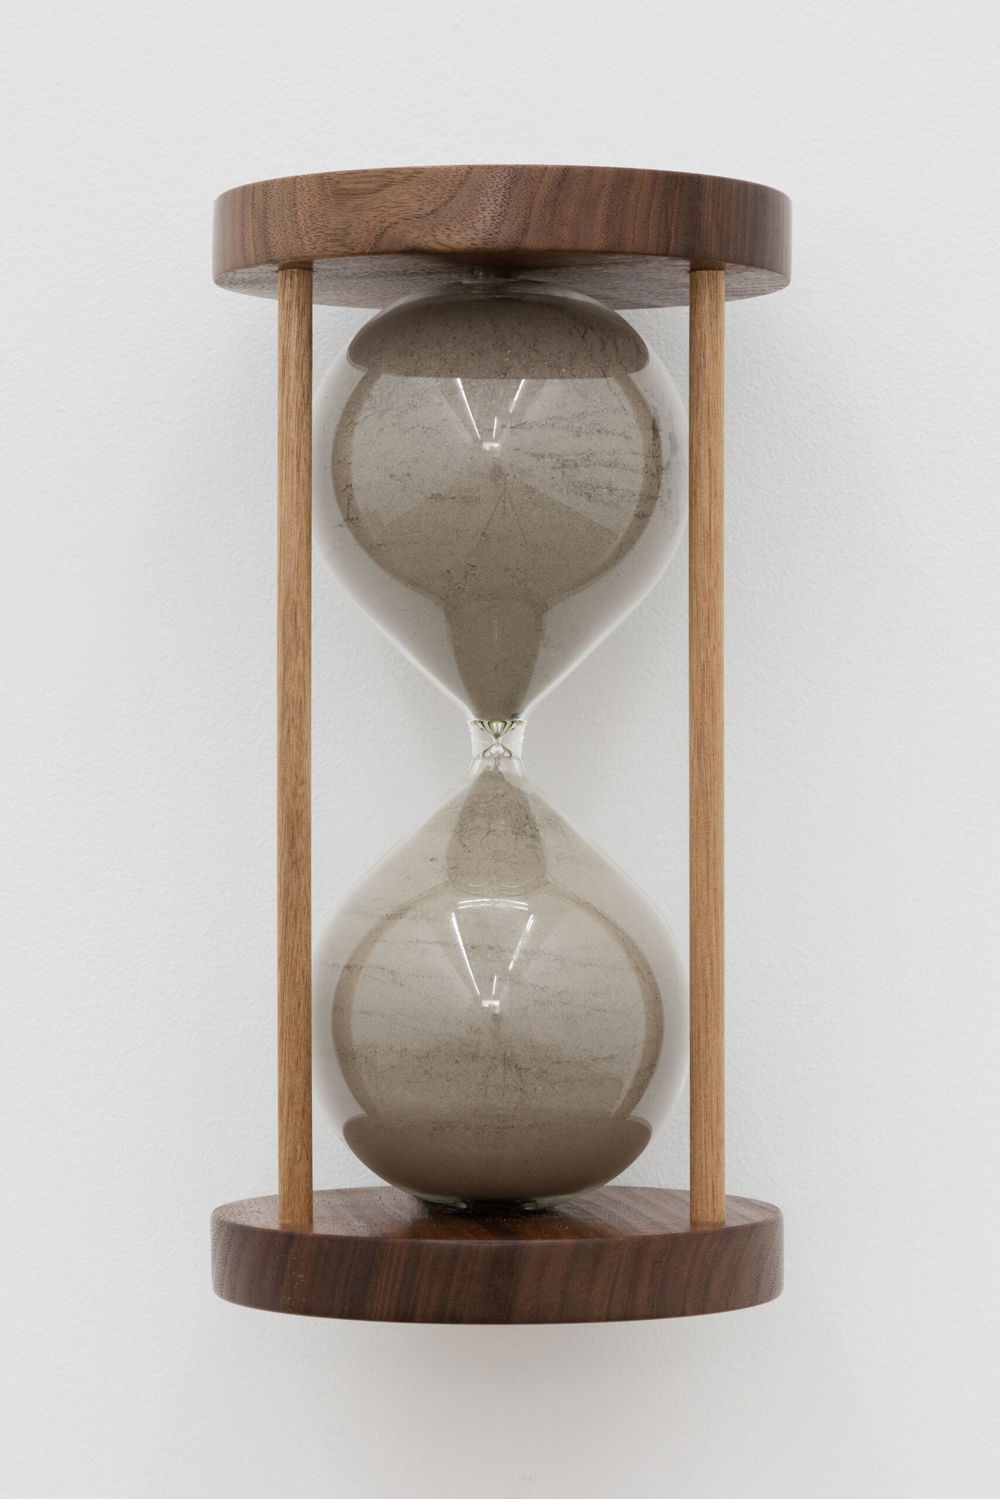 An hourglass with both sides completely filled with gray dust is hung on the wall. The glass is set between a dark wooden base and cap with two visible wooden spindles. Inside the glass the gray dust forms cracks and layers.